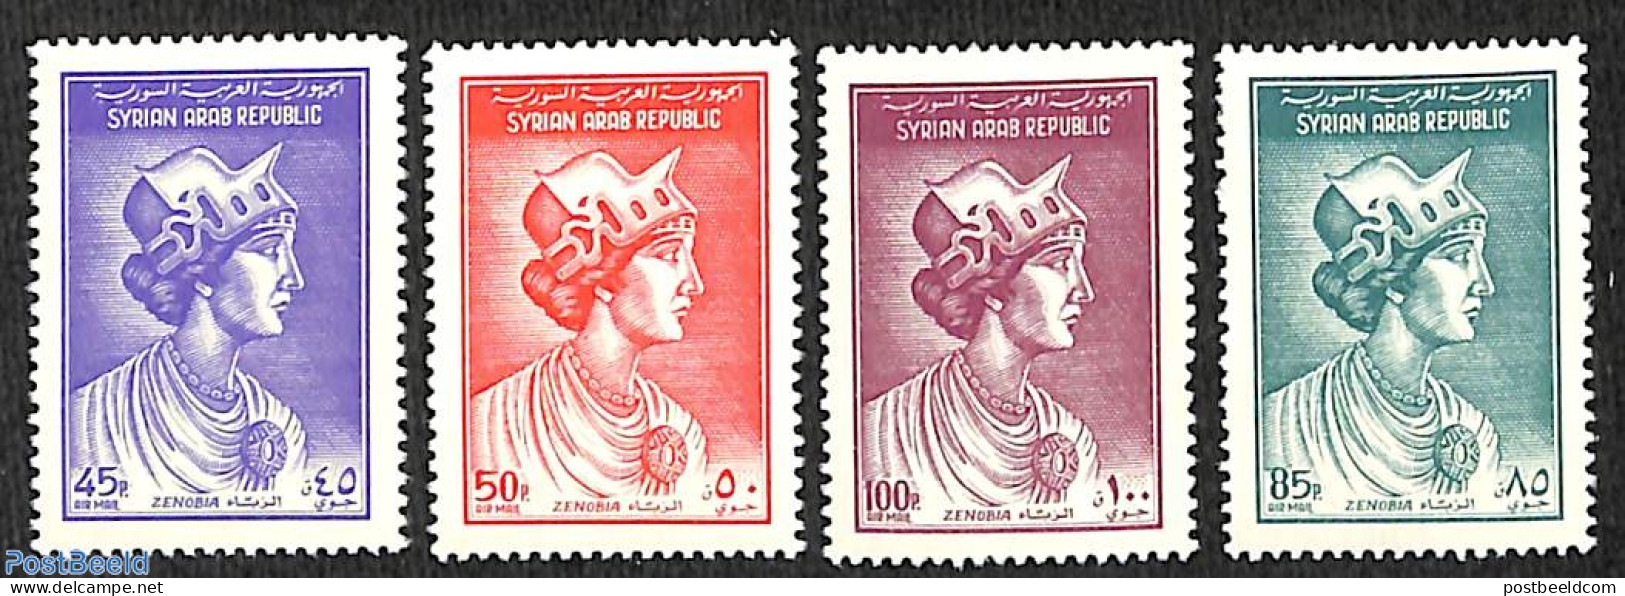 Syria 1962 Queen Zonobia 4v, Mint NH, History - Kings & Queens (Royalty) - Royalties, Royals